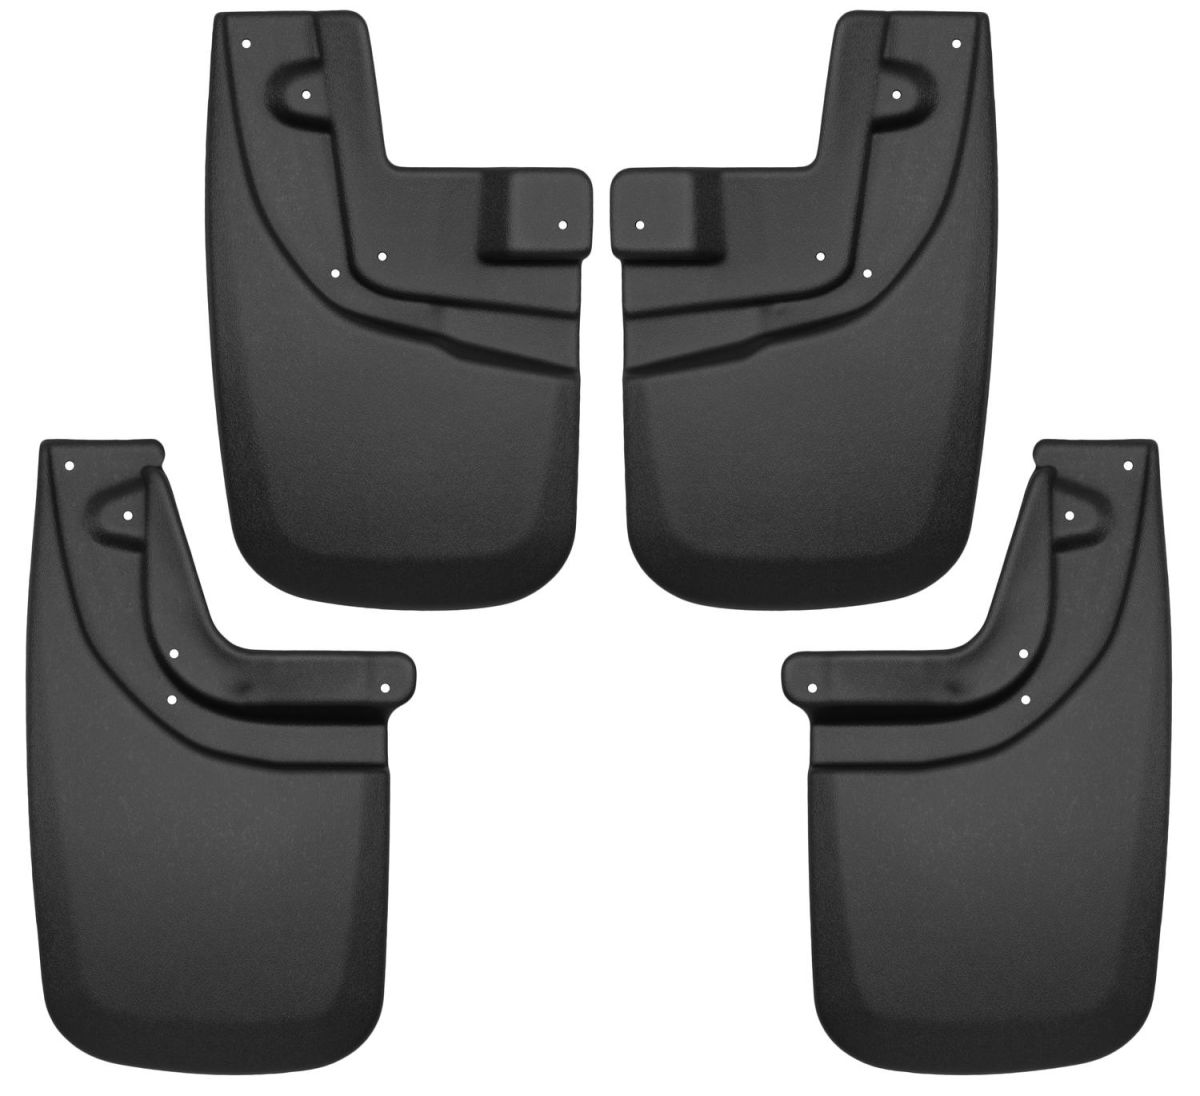 Husky Liners - Husky Liners 05-15 Toyota Tacoma Front and Rear Mud Guard Set Black 56936